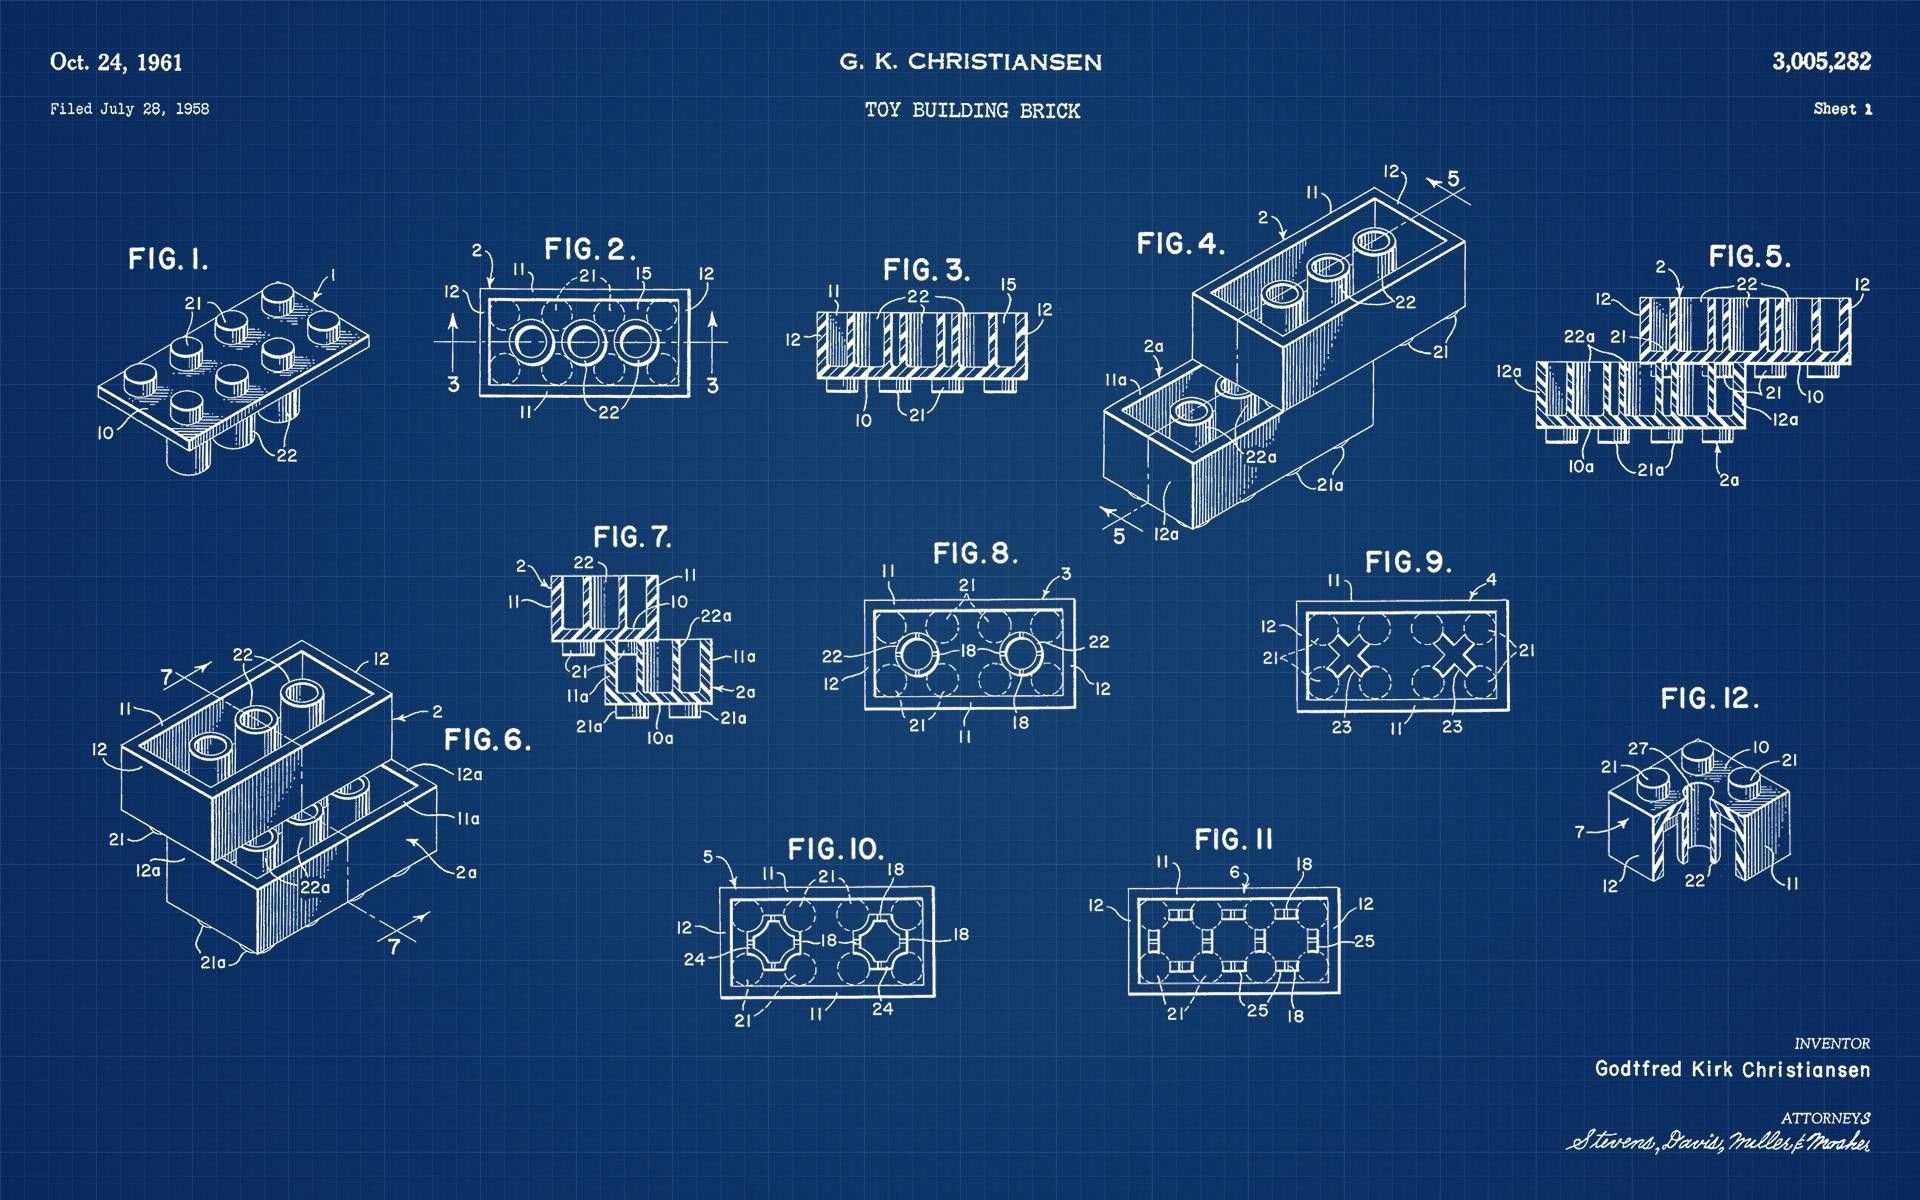 Download HD Wallpaper Of 175237 LEGO, Bricks, Infographics, Danish, Numbers, Blue Background, Sketches, Toys, 3D, Geometry,. Lego Wallpaper, Lego Blueprint, Lego